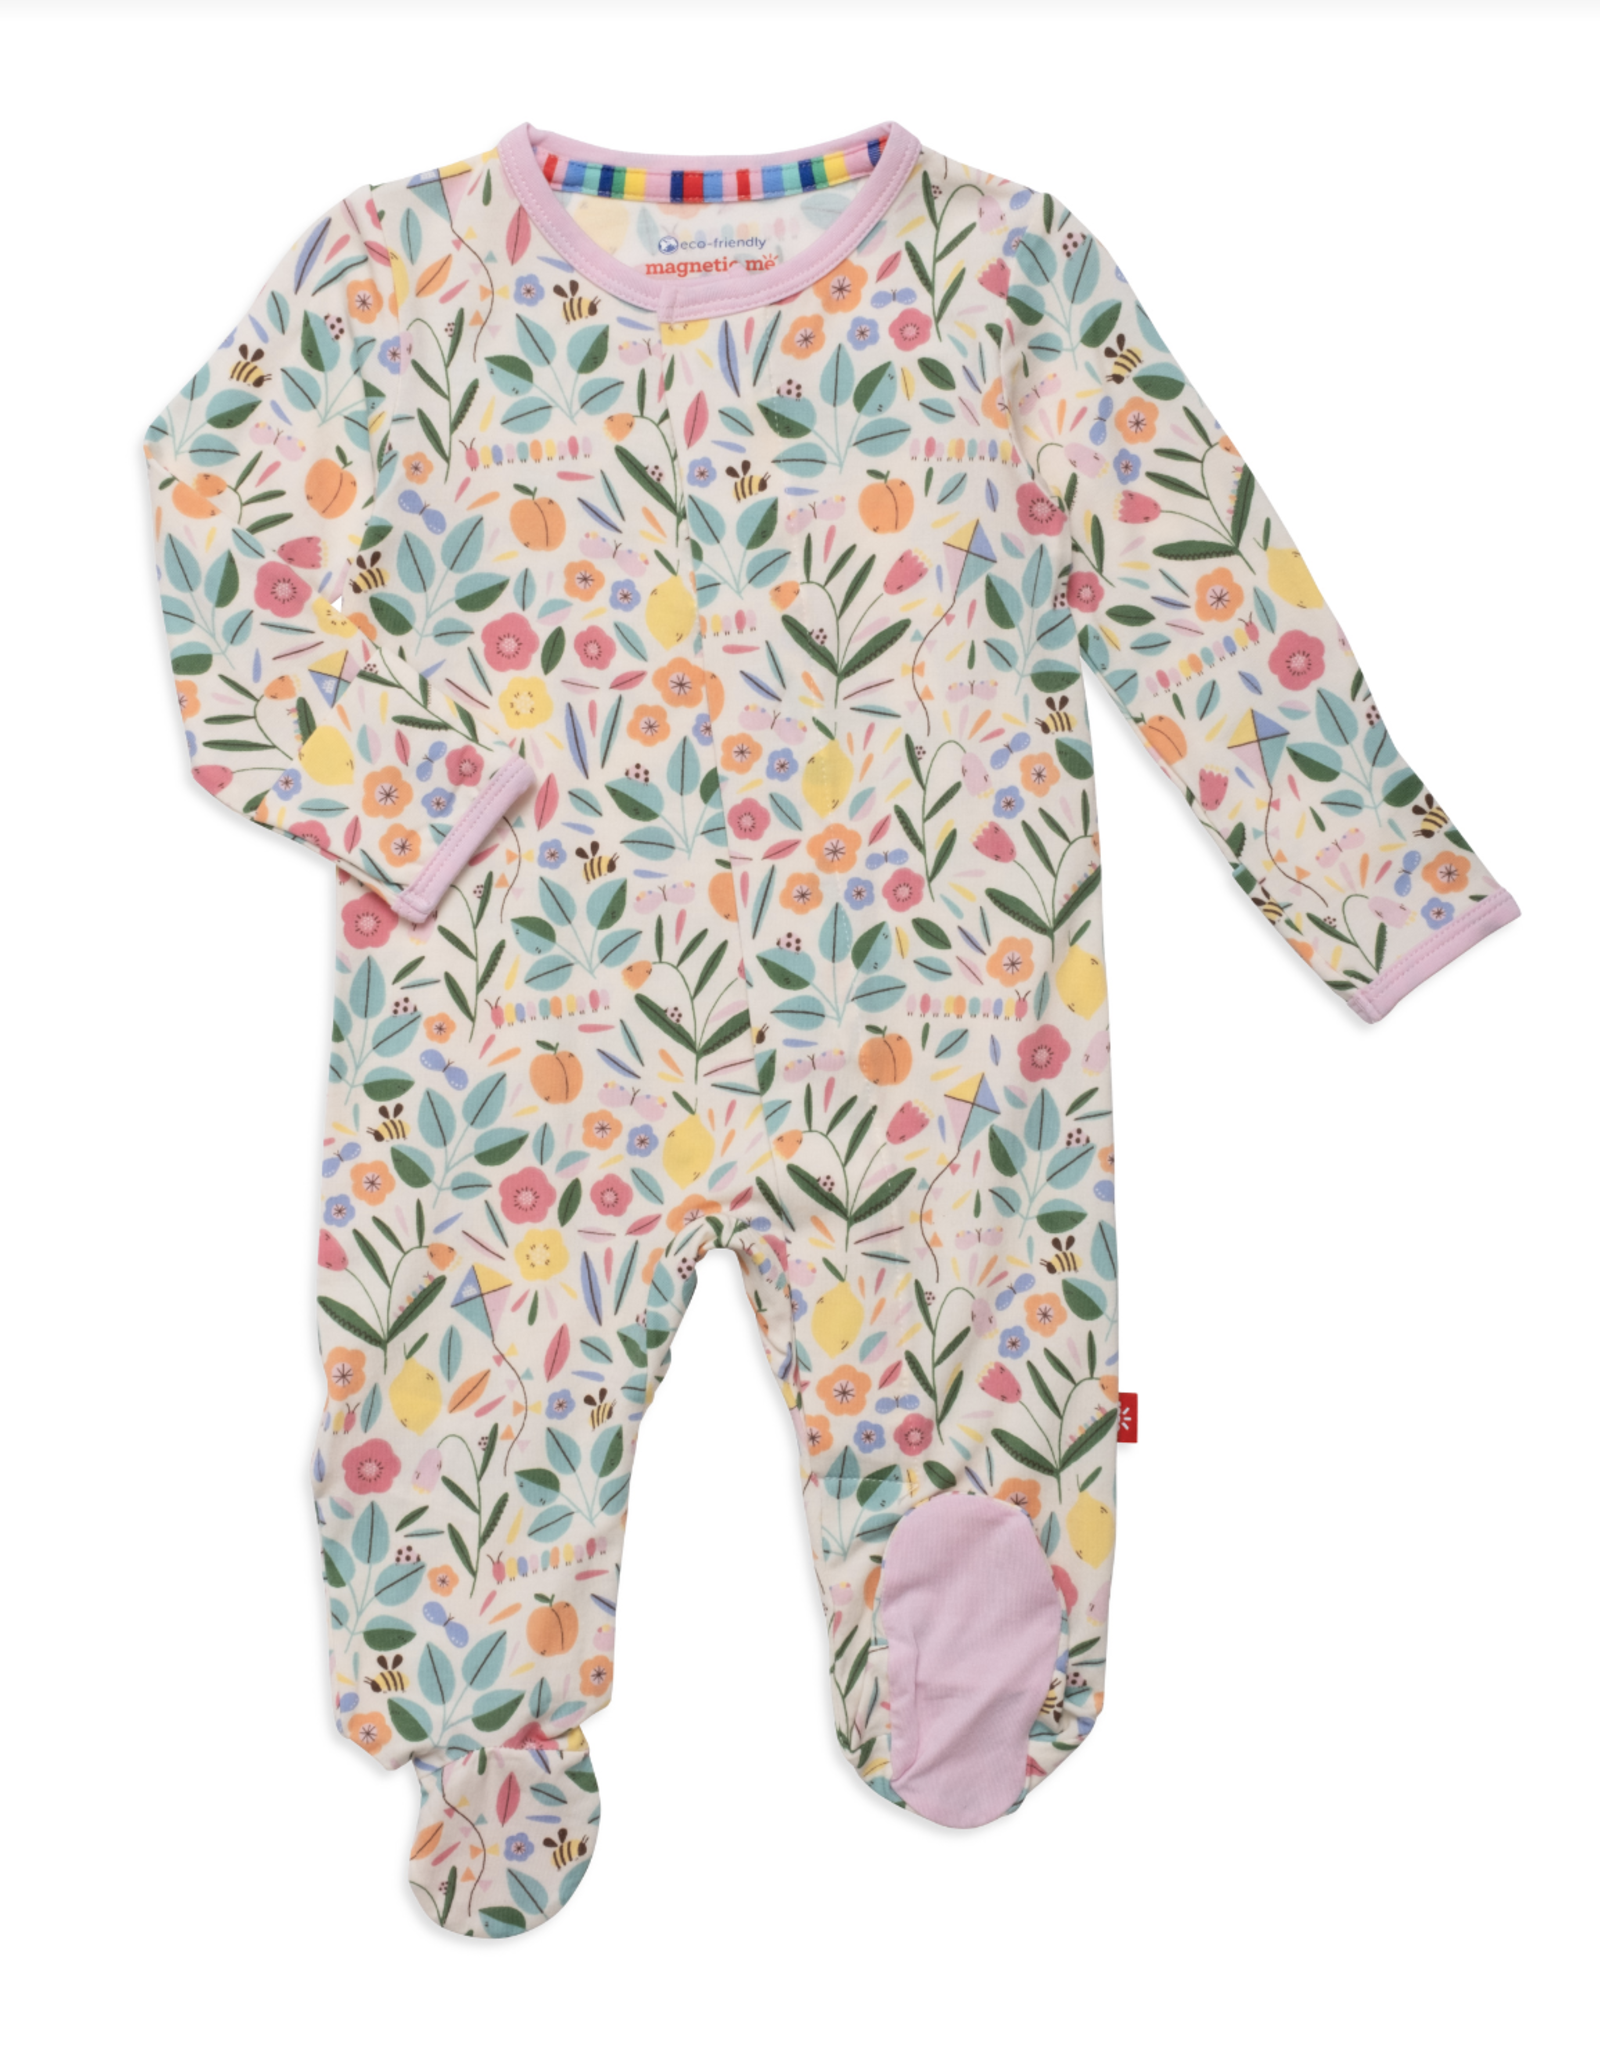 Magnificent Baby Lifes Peachy Magnetic Footie